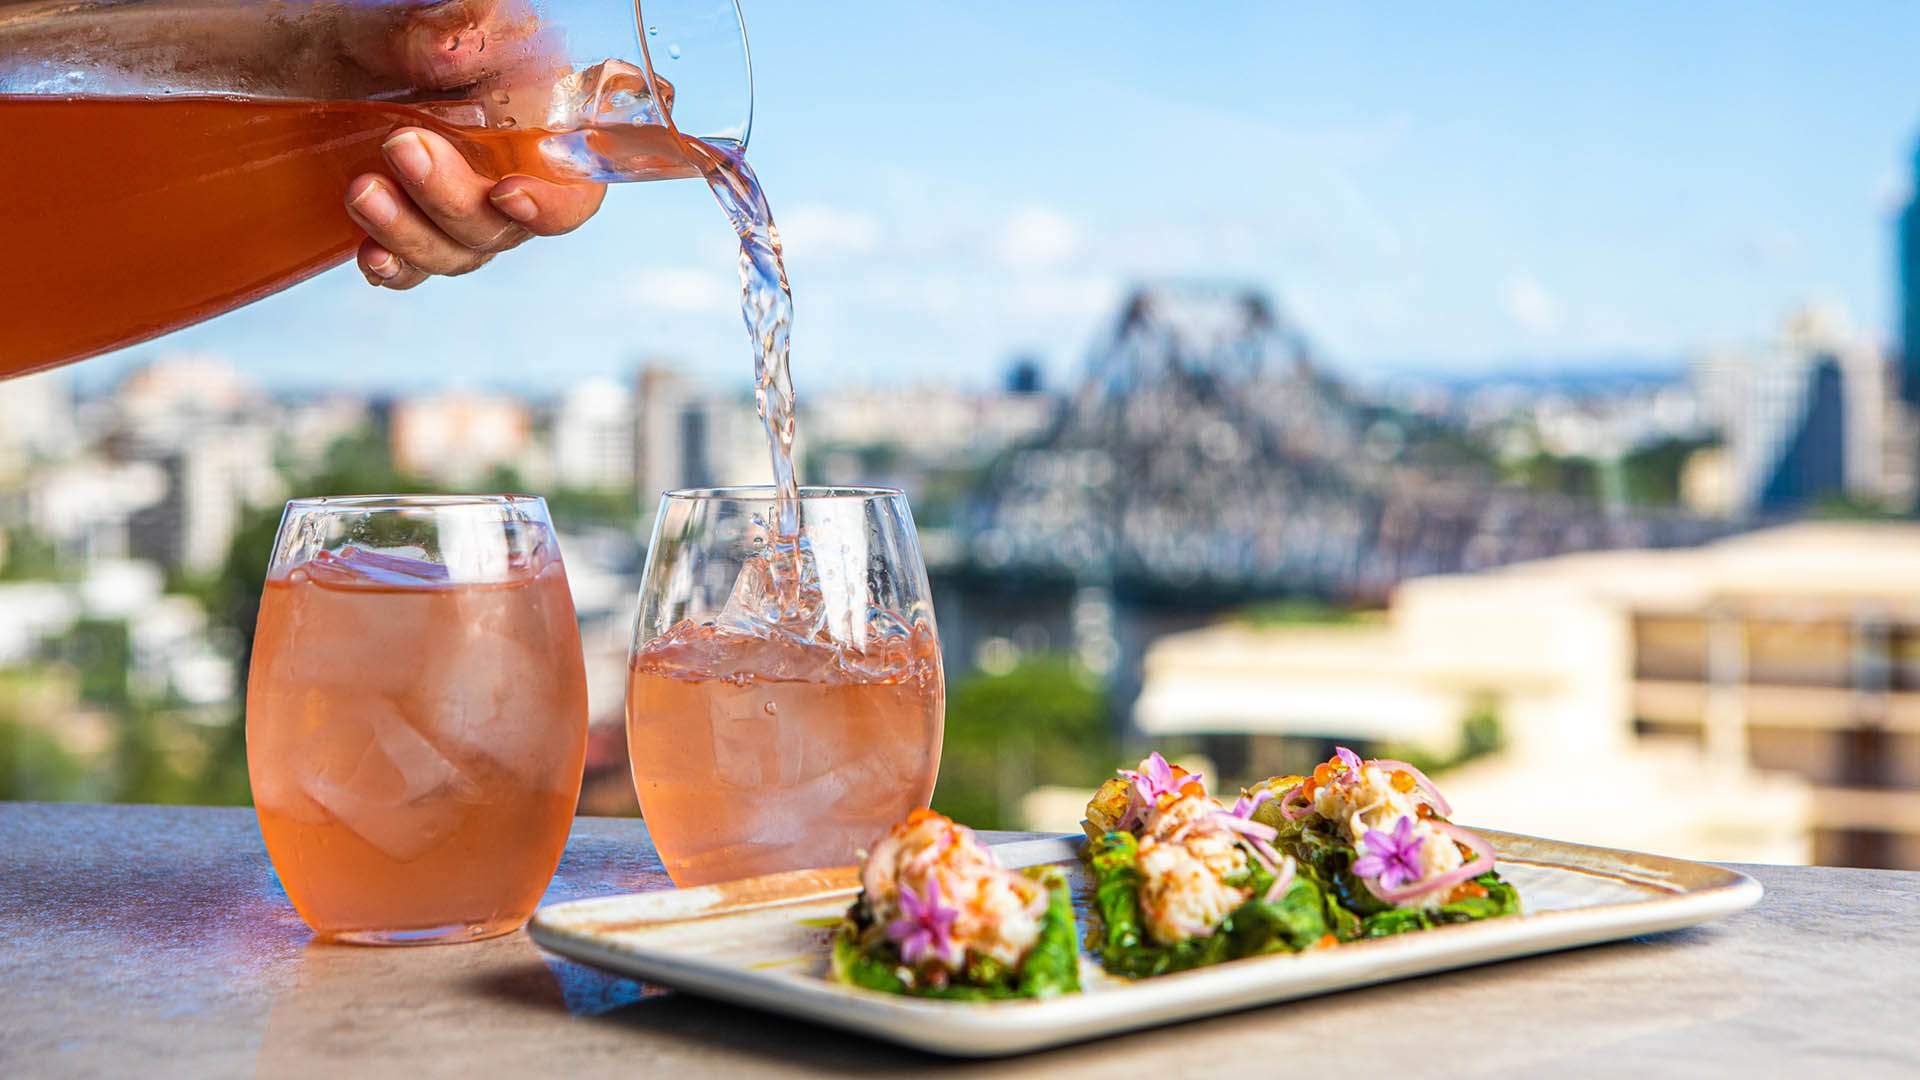 Iris Is the Soon-to-Open New Rooftop Bar and Restaurant That'll Peer Over Brunswick Street